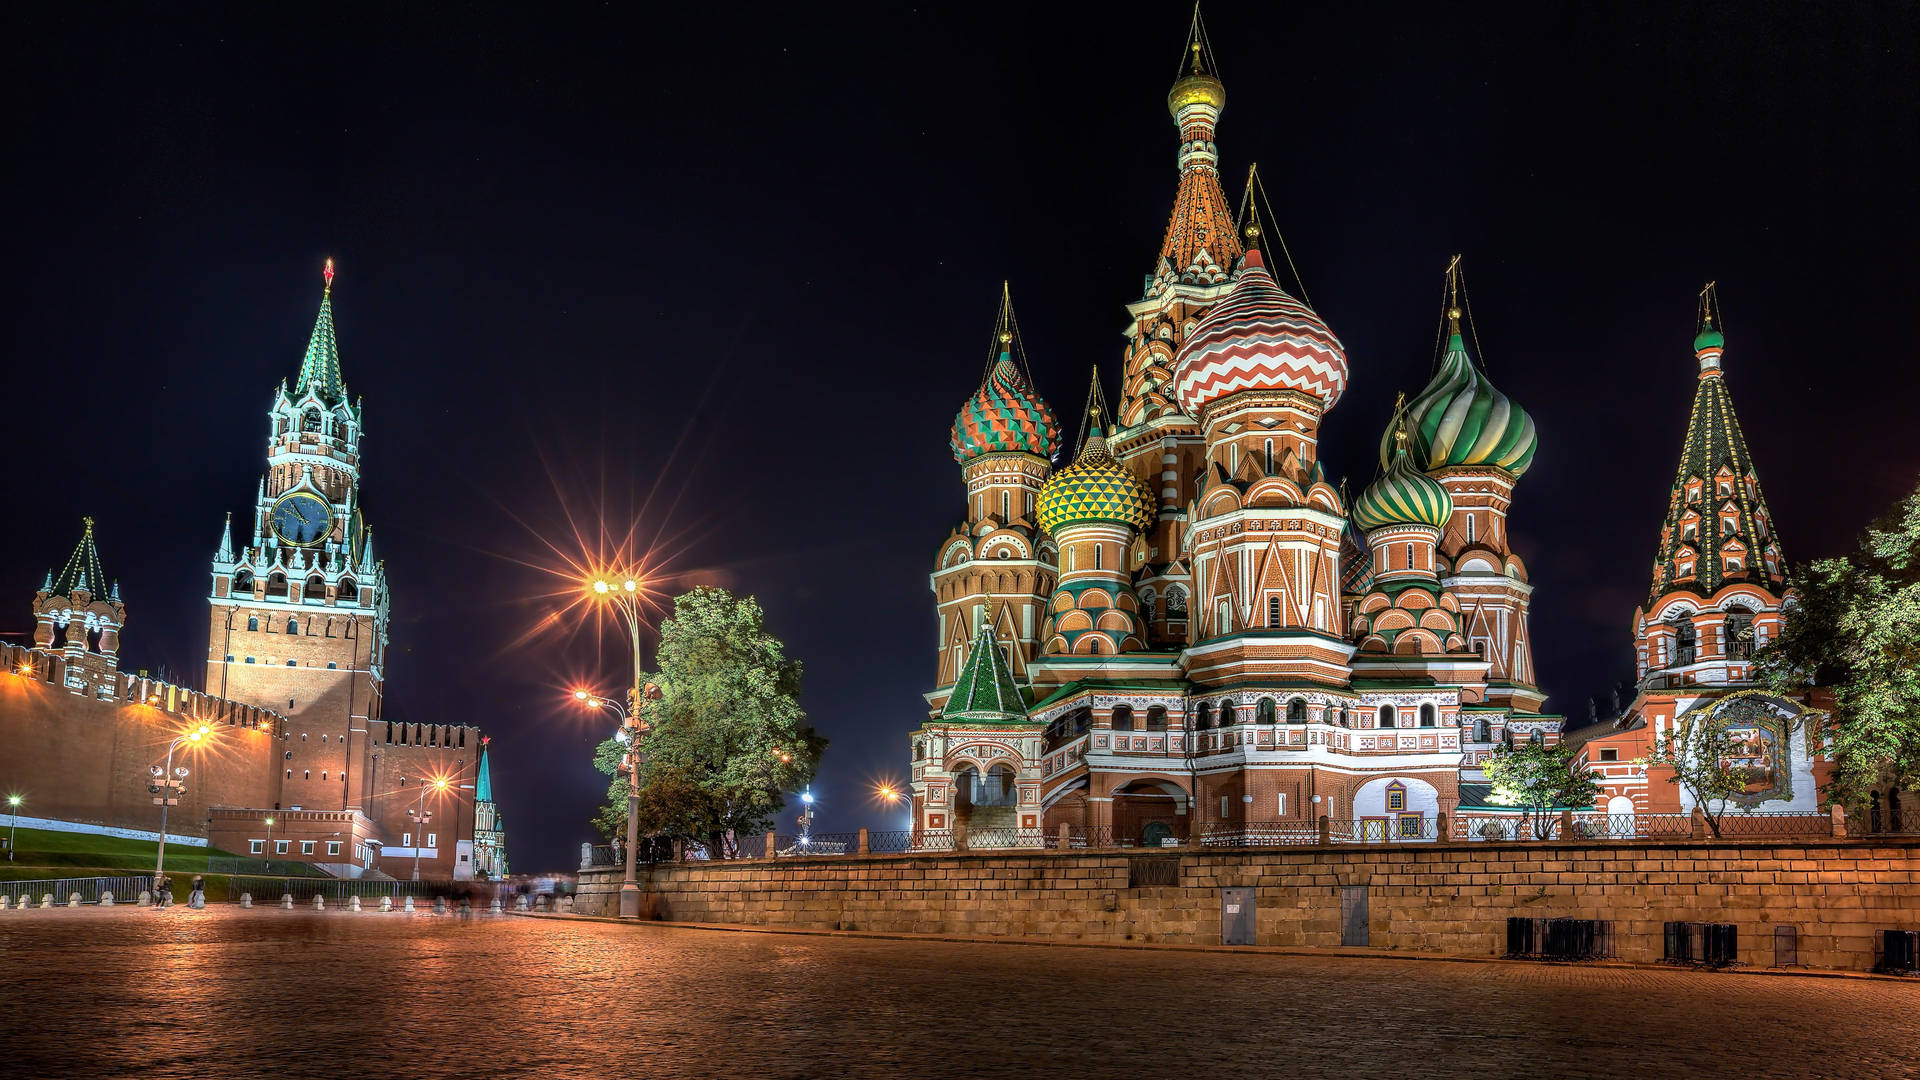 Heart Of Russia At Night Wallpaper